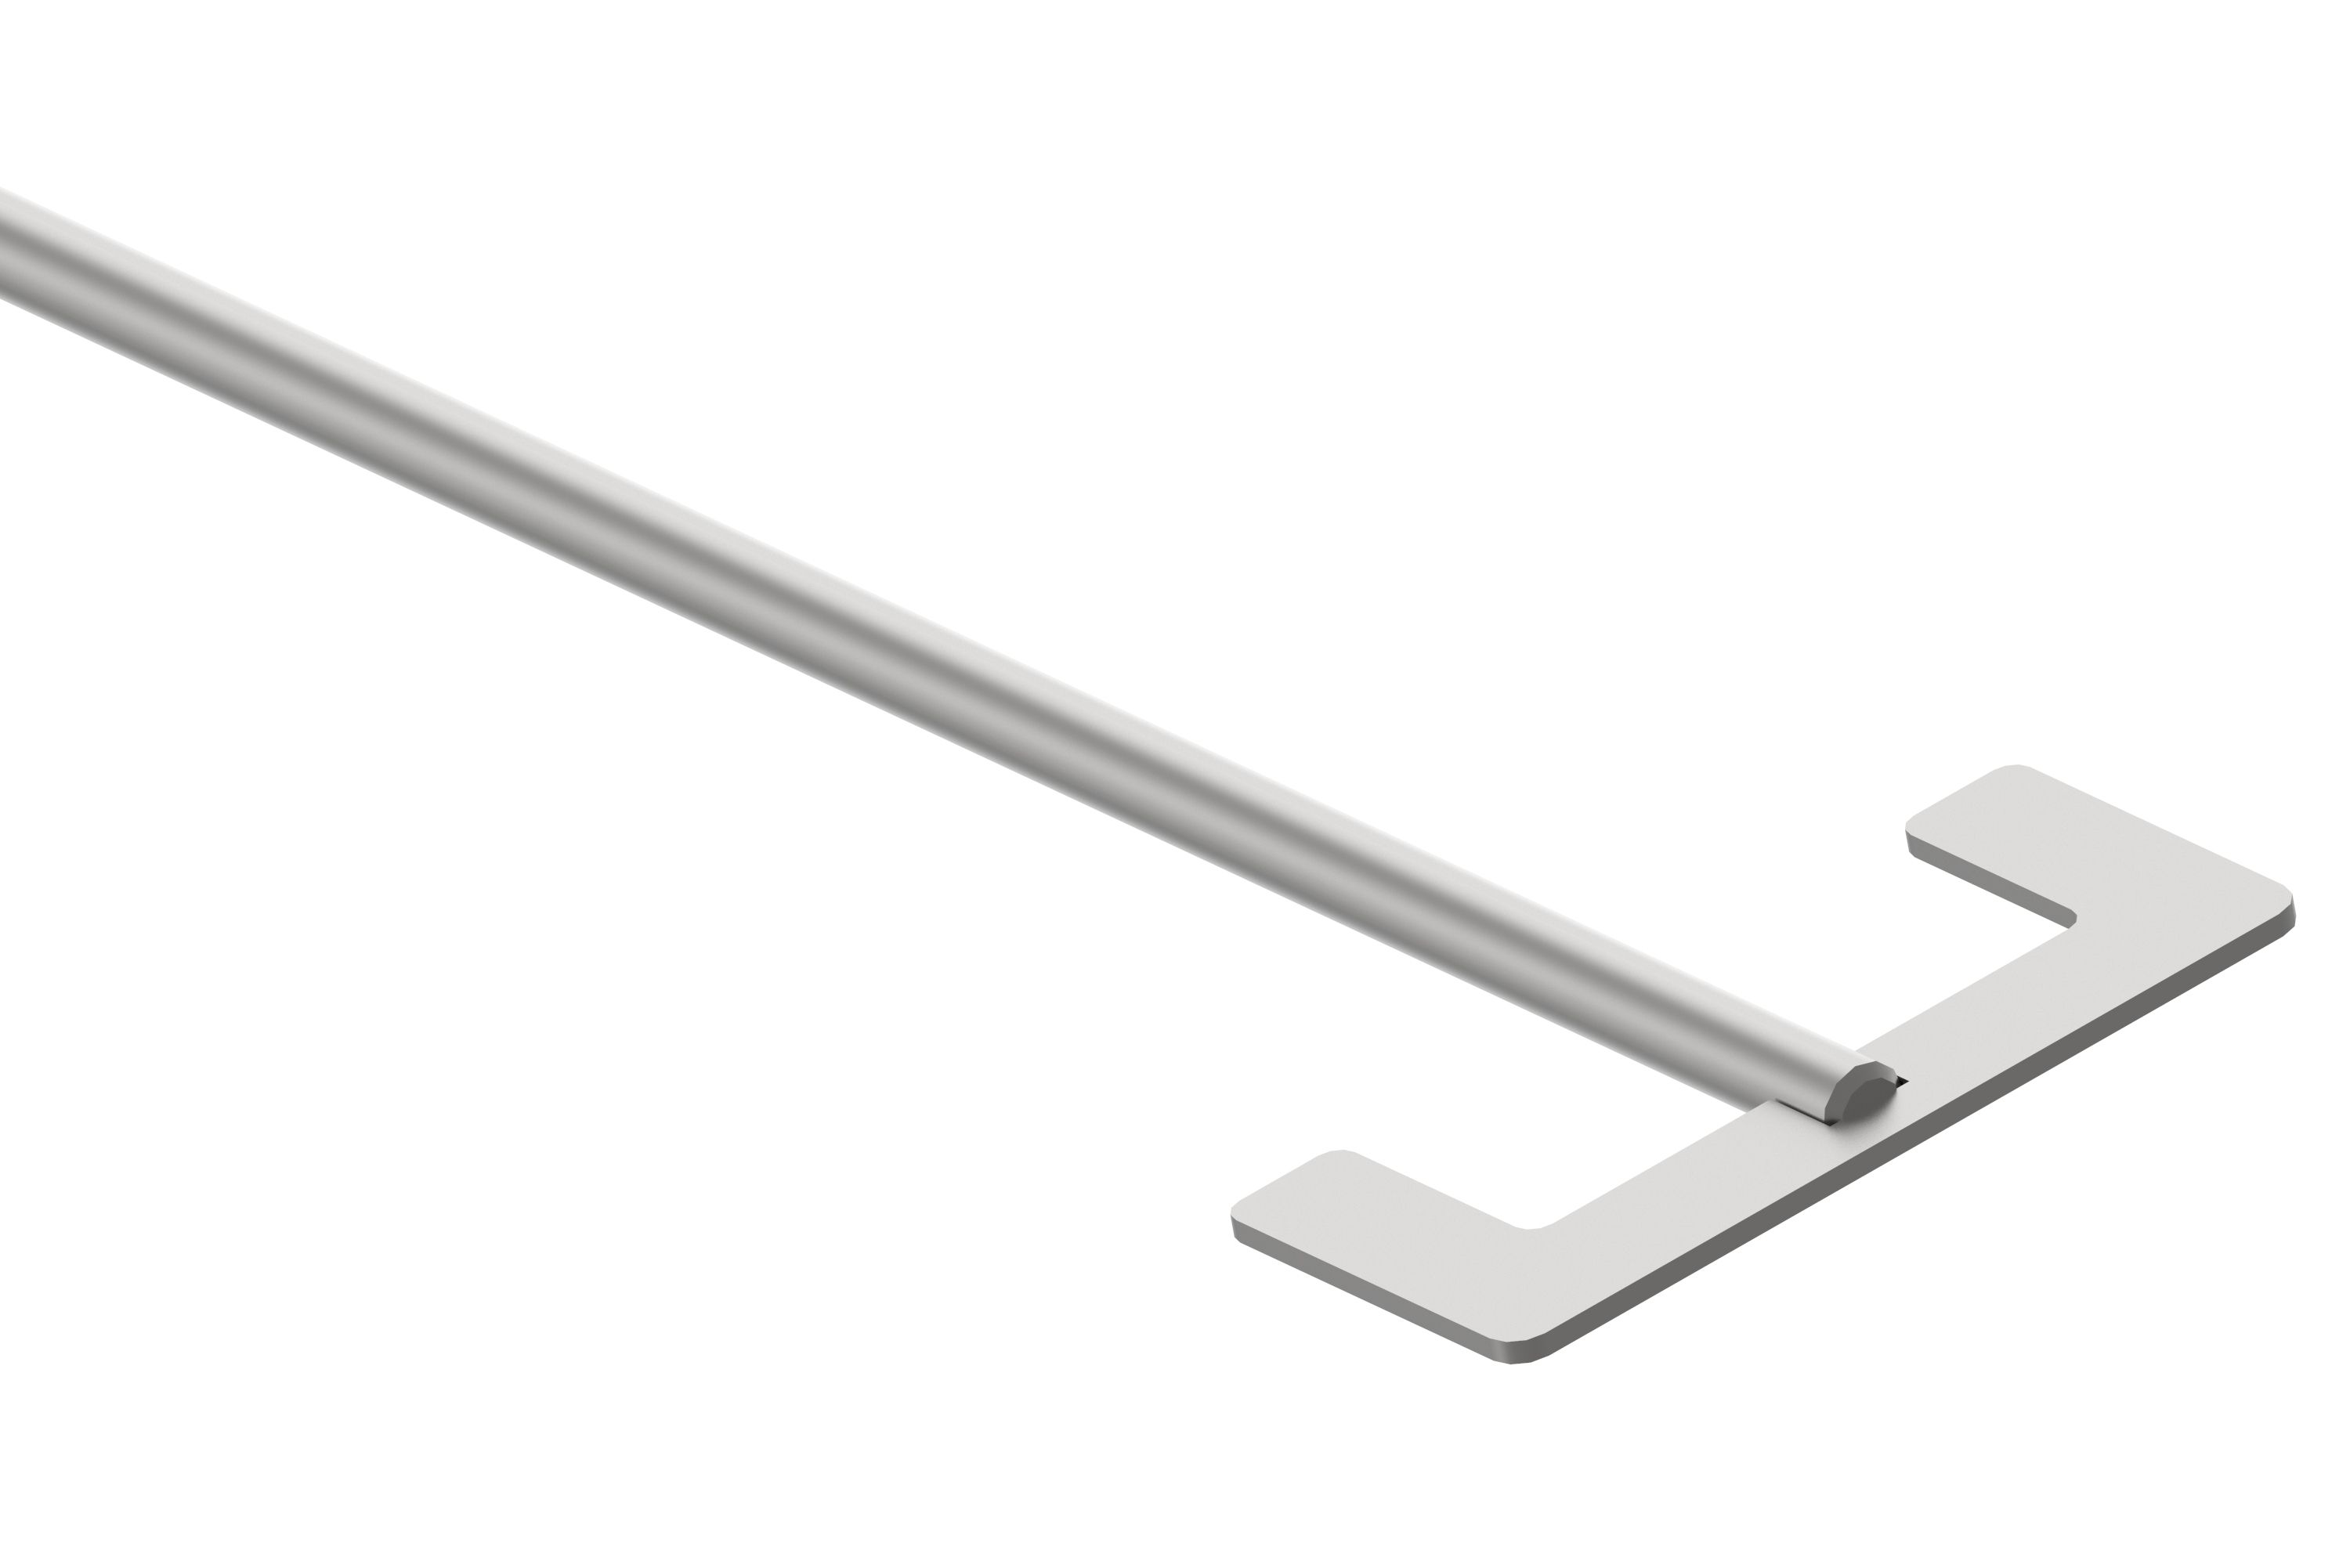 Laboratory anchor stirrer made out of stainless steel